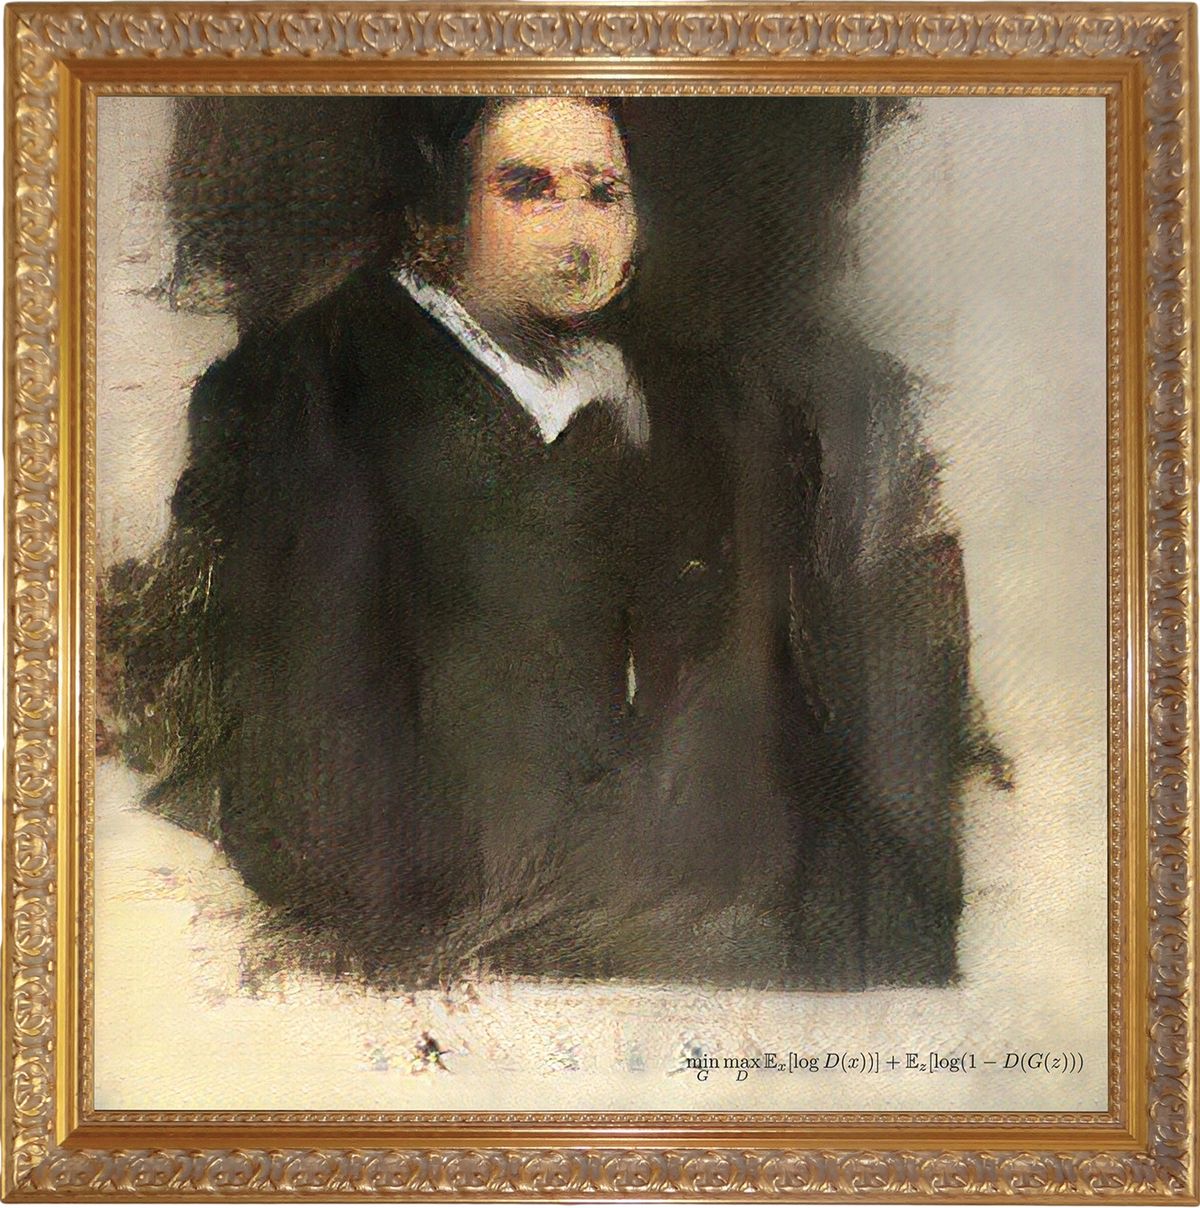 Portrait of Edmond Belamy was created using an as-yet-unrevealed source code and hits the auction block this month Courtesy of Christie’s